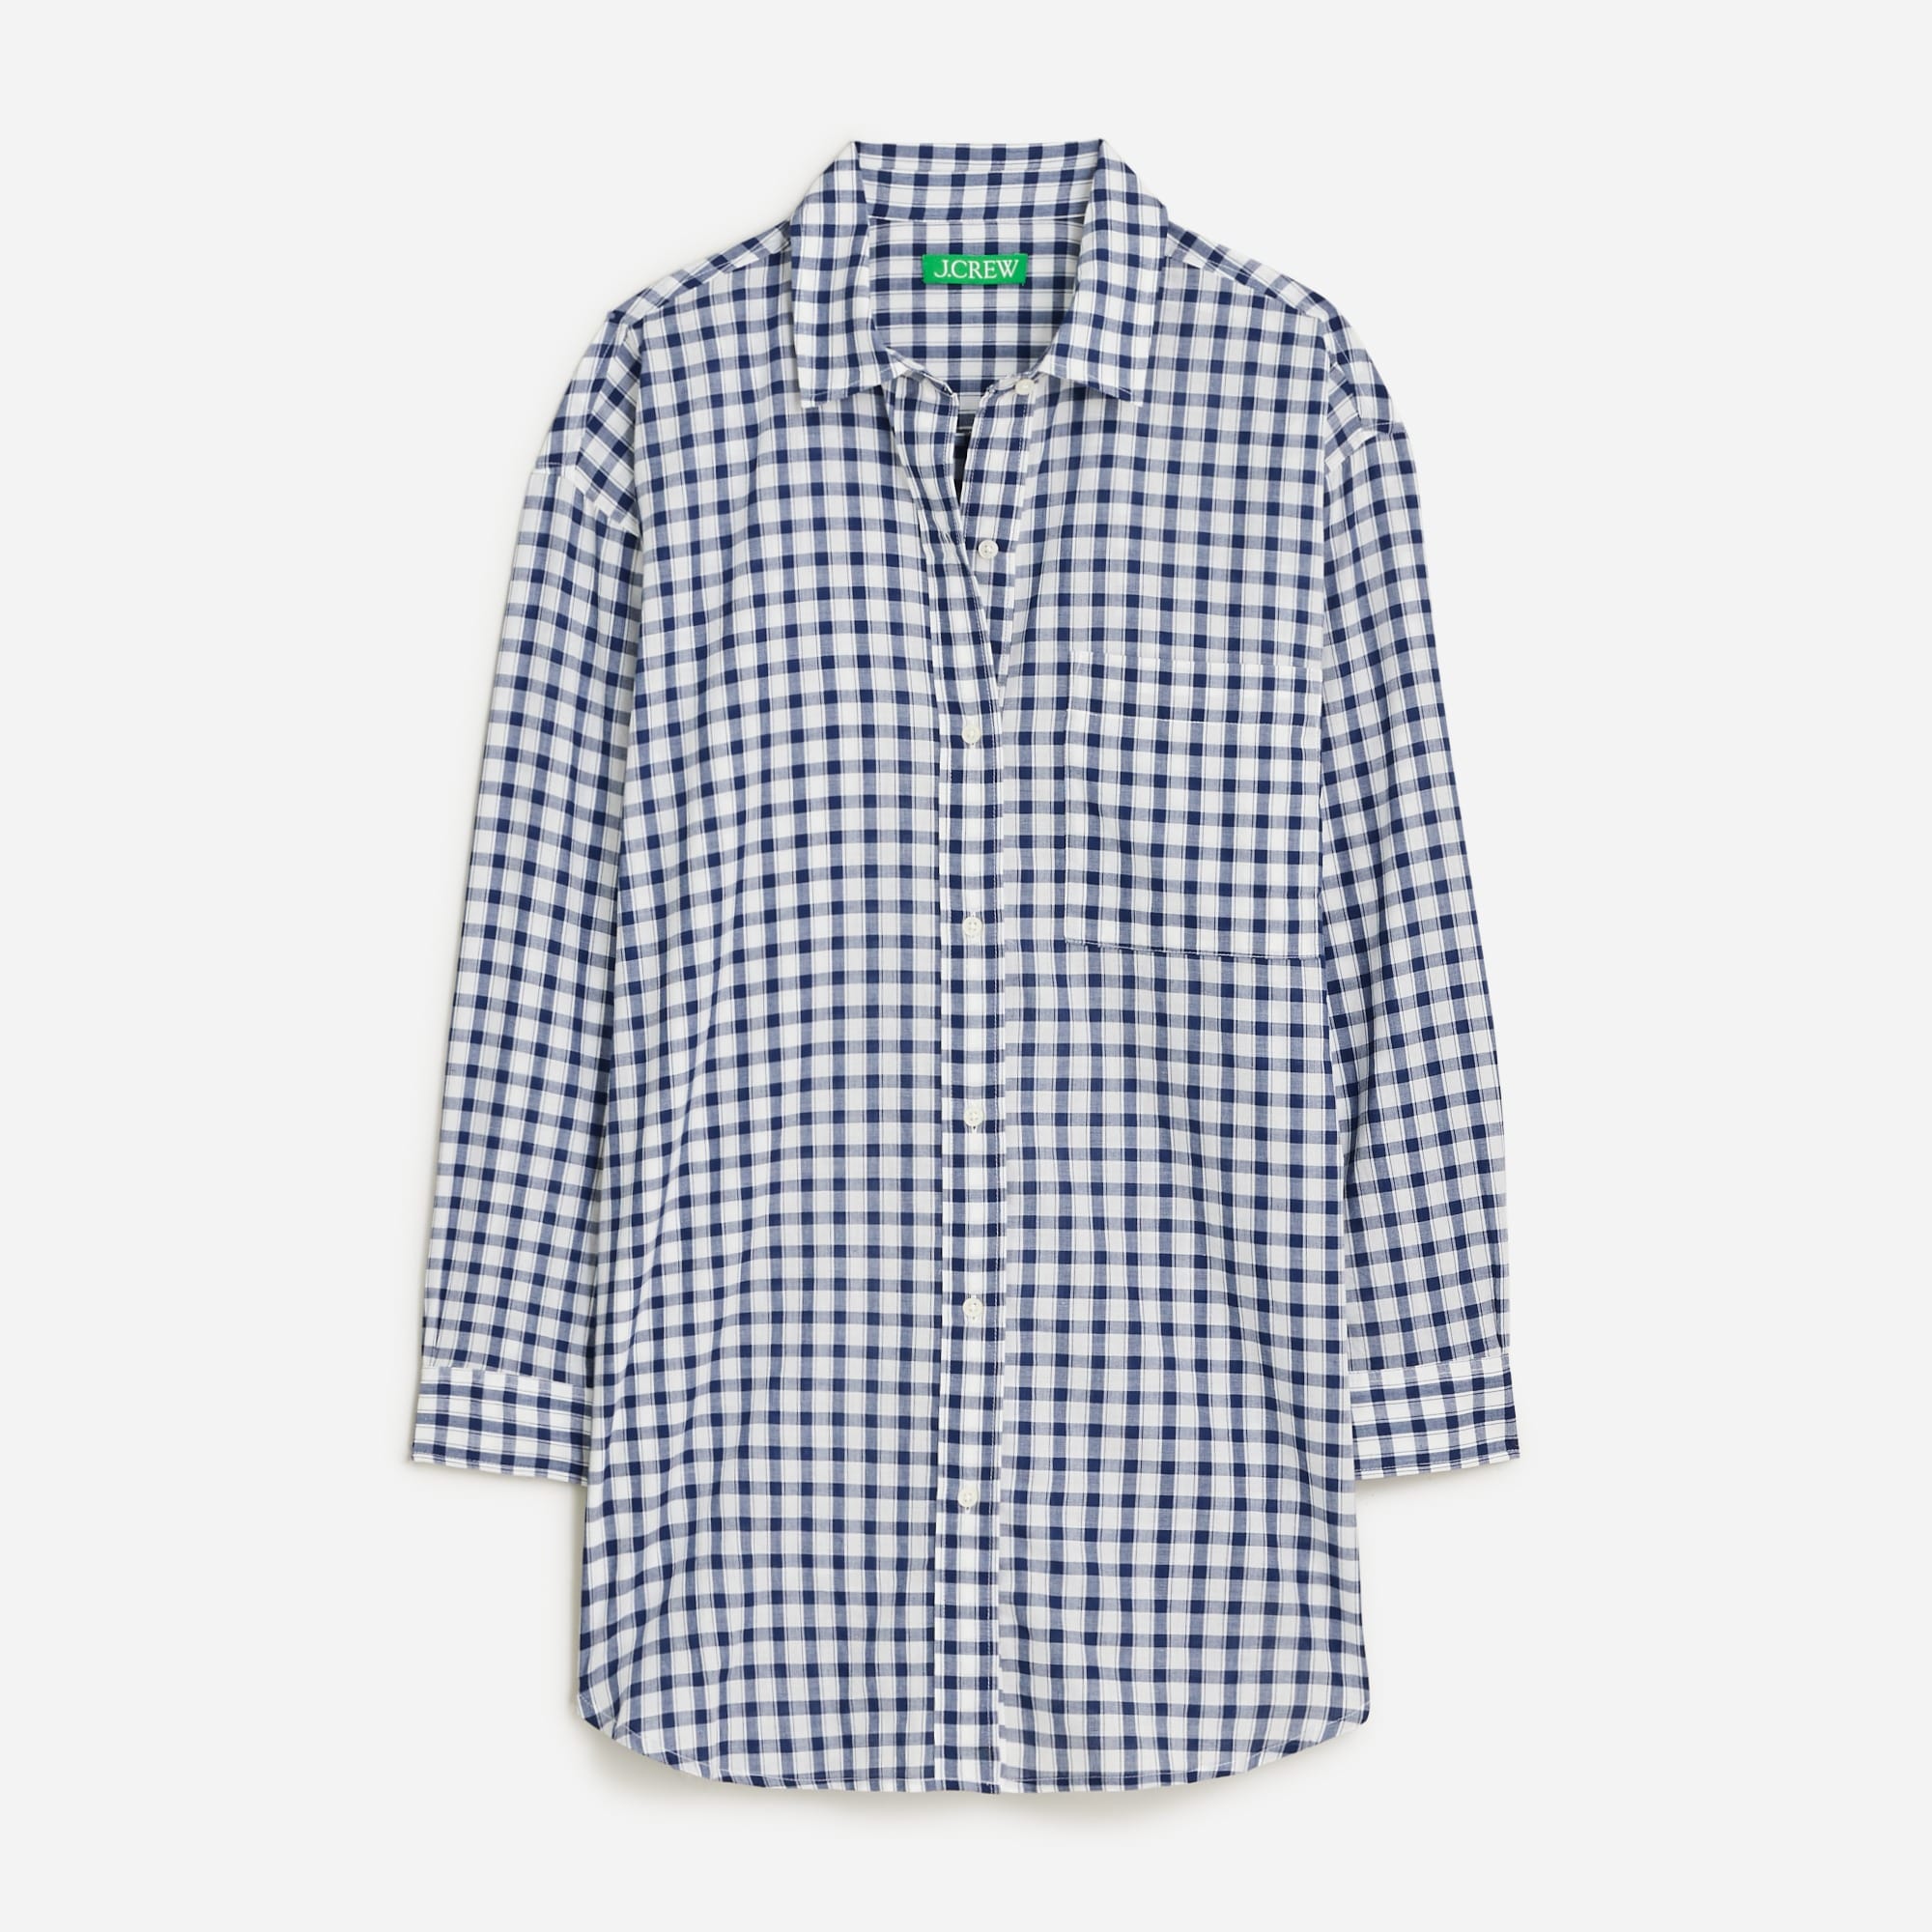  Cotton voile beach shirt in gingham